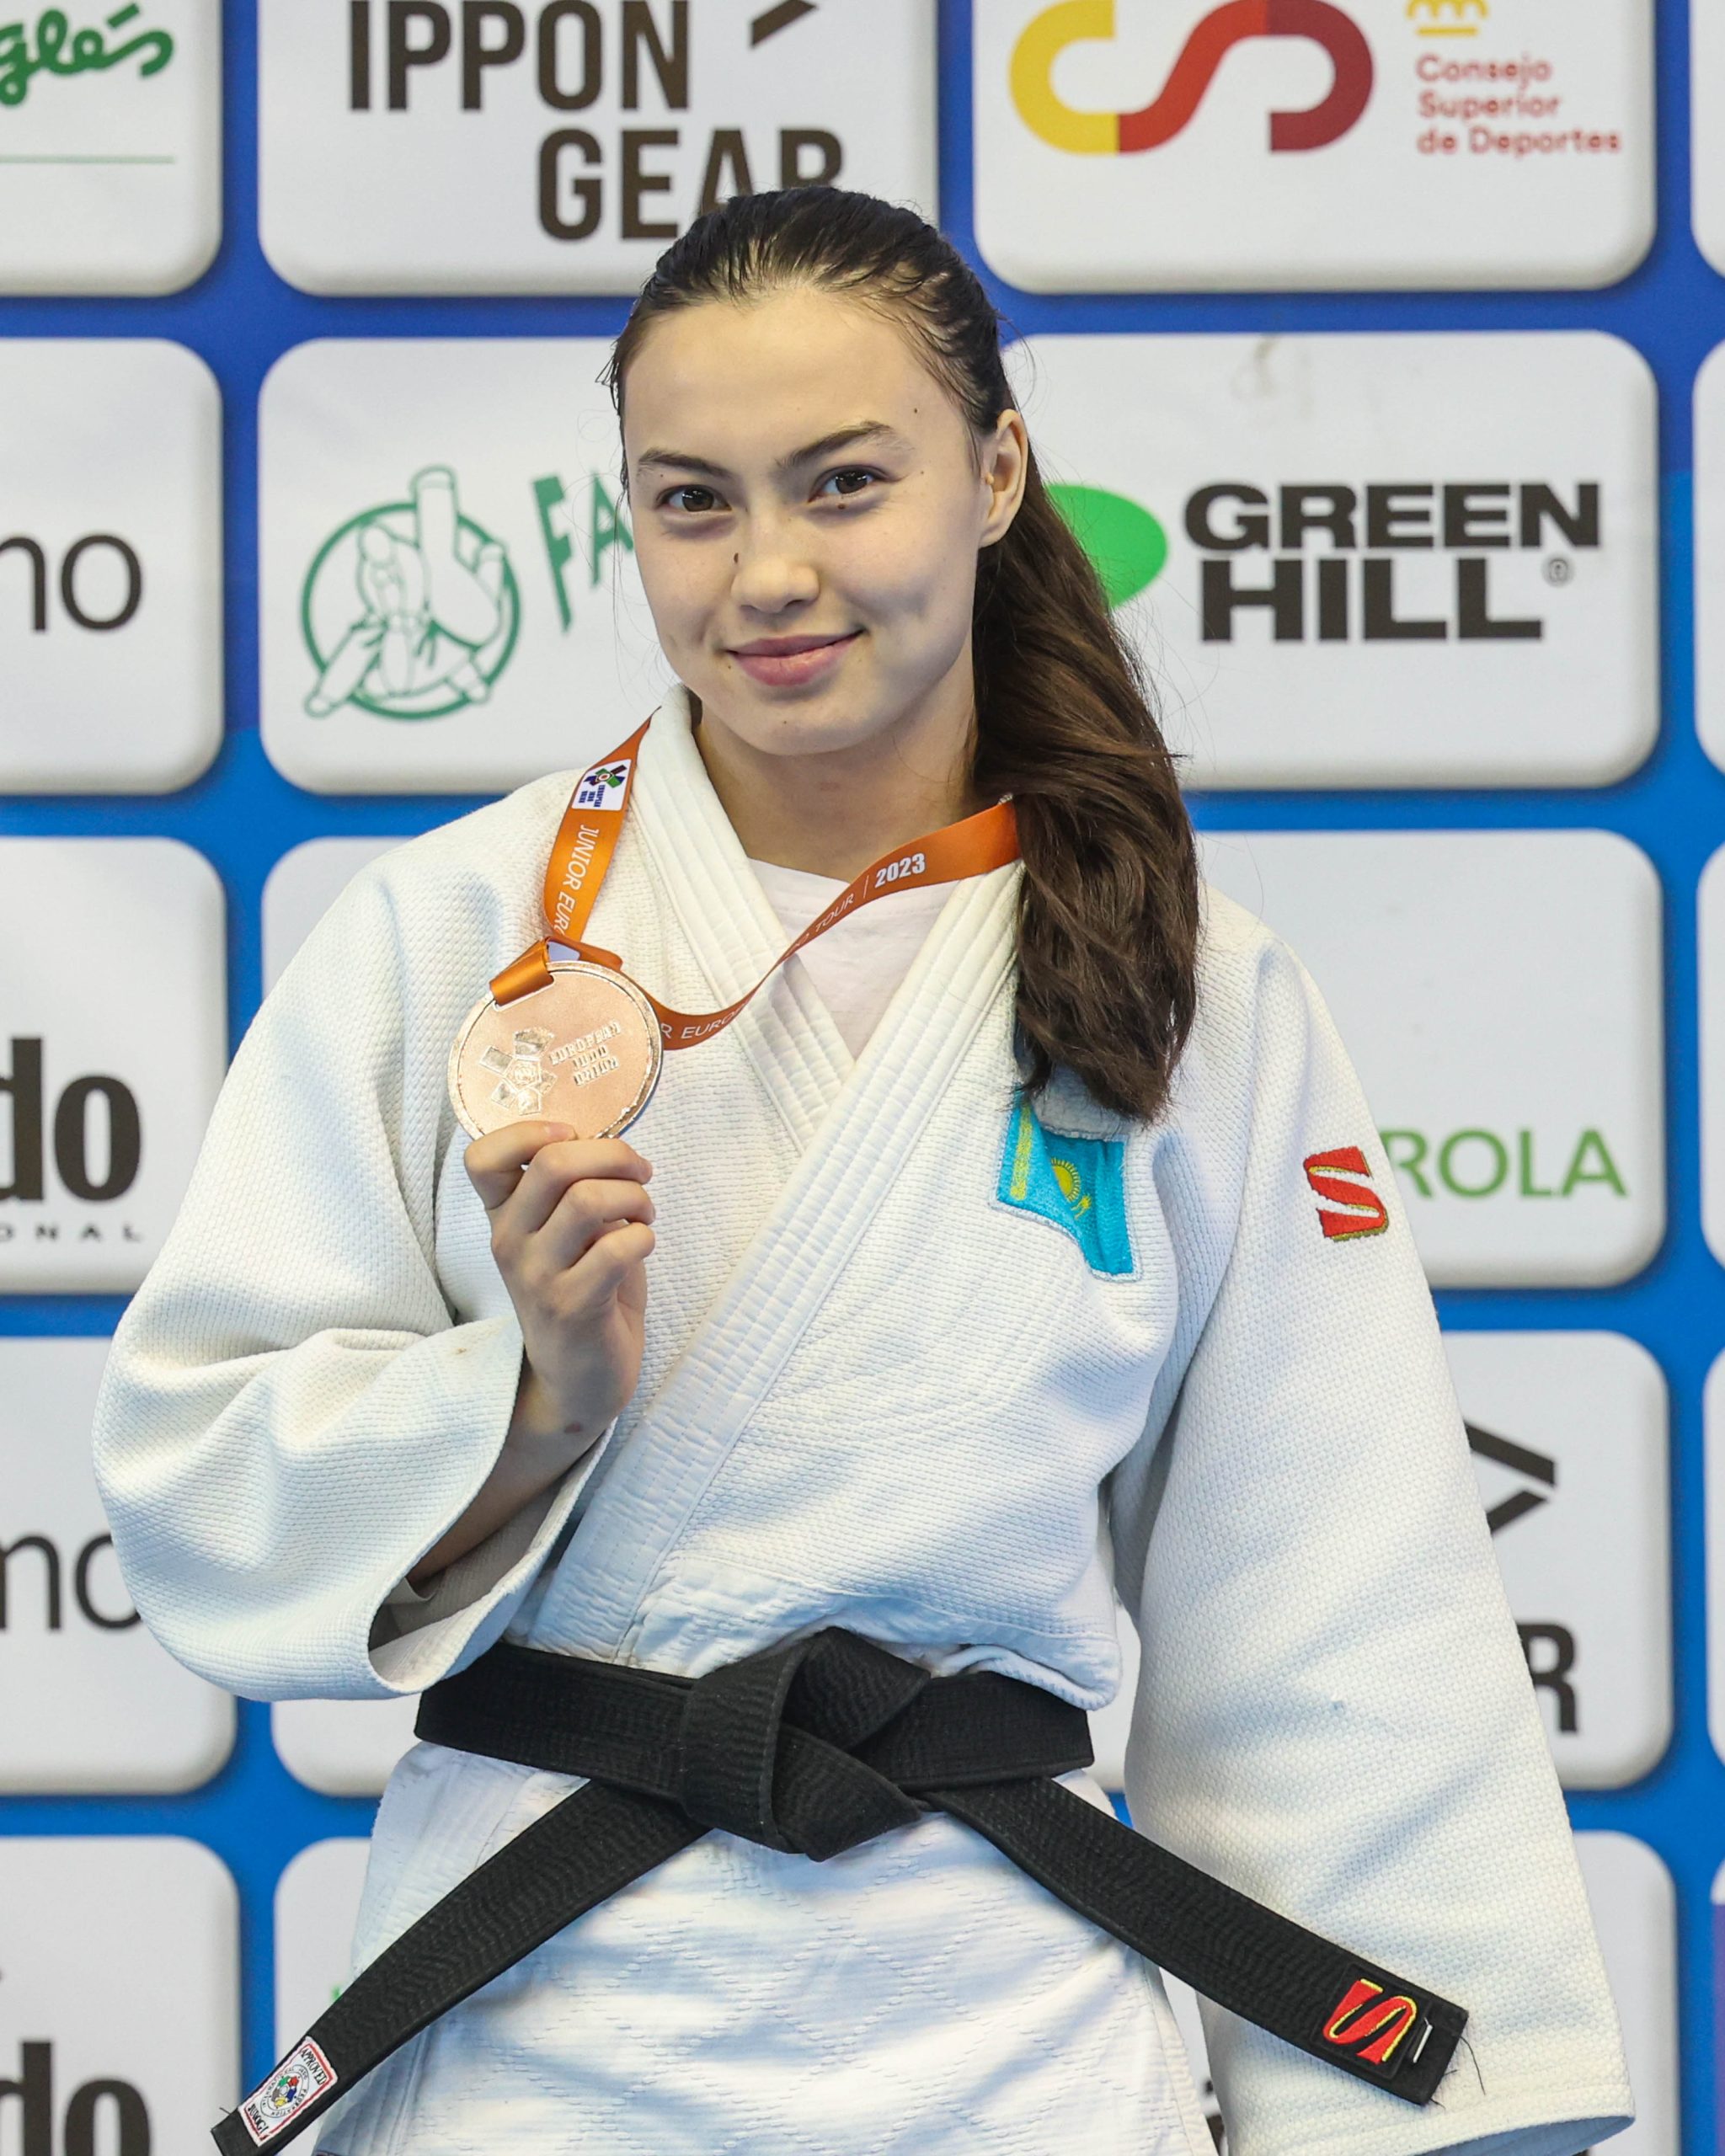 For portrait / head shots, ask the judoka to show you the medal and smile